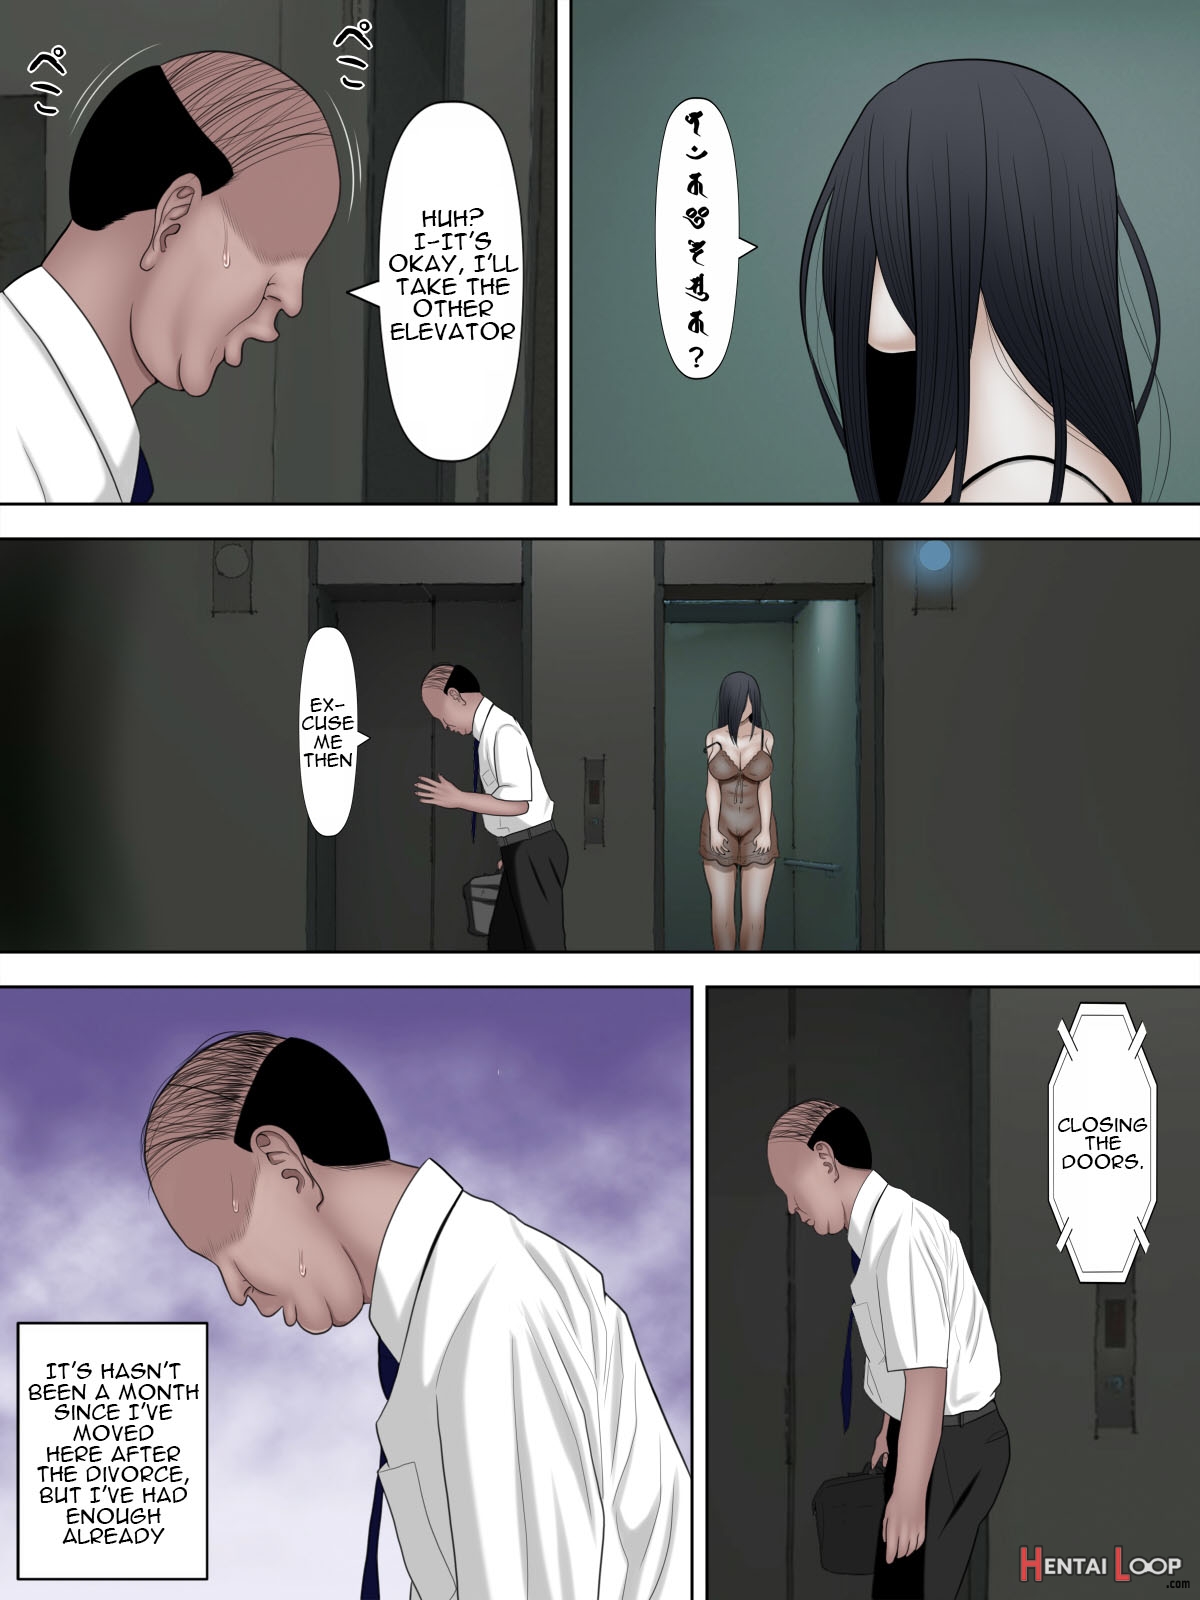 Saseko ~the Haunted Building That Seduces Men Into Being Useless~ page 4